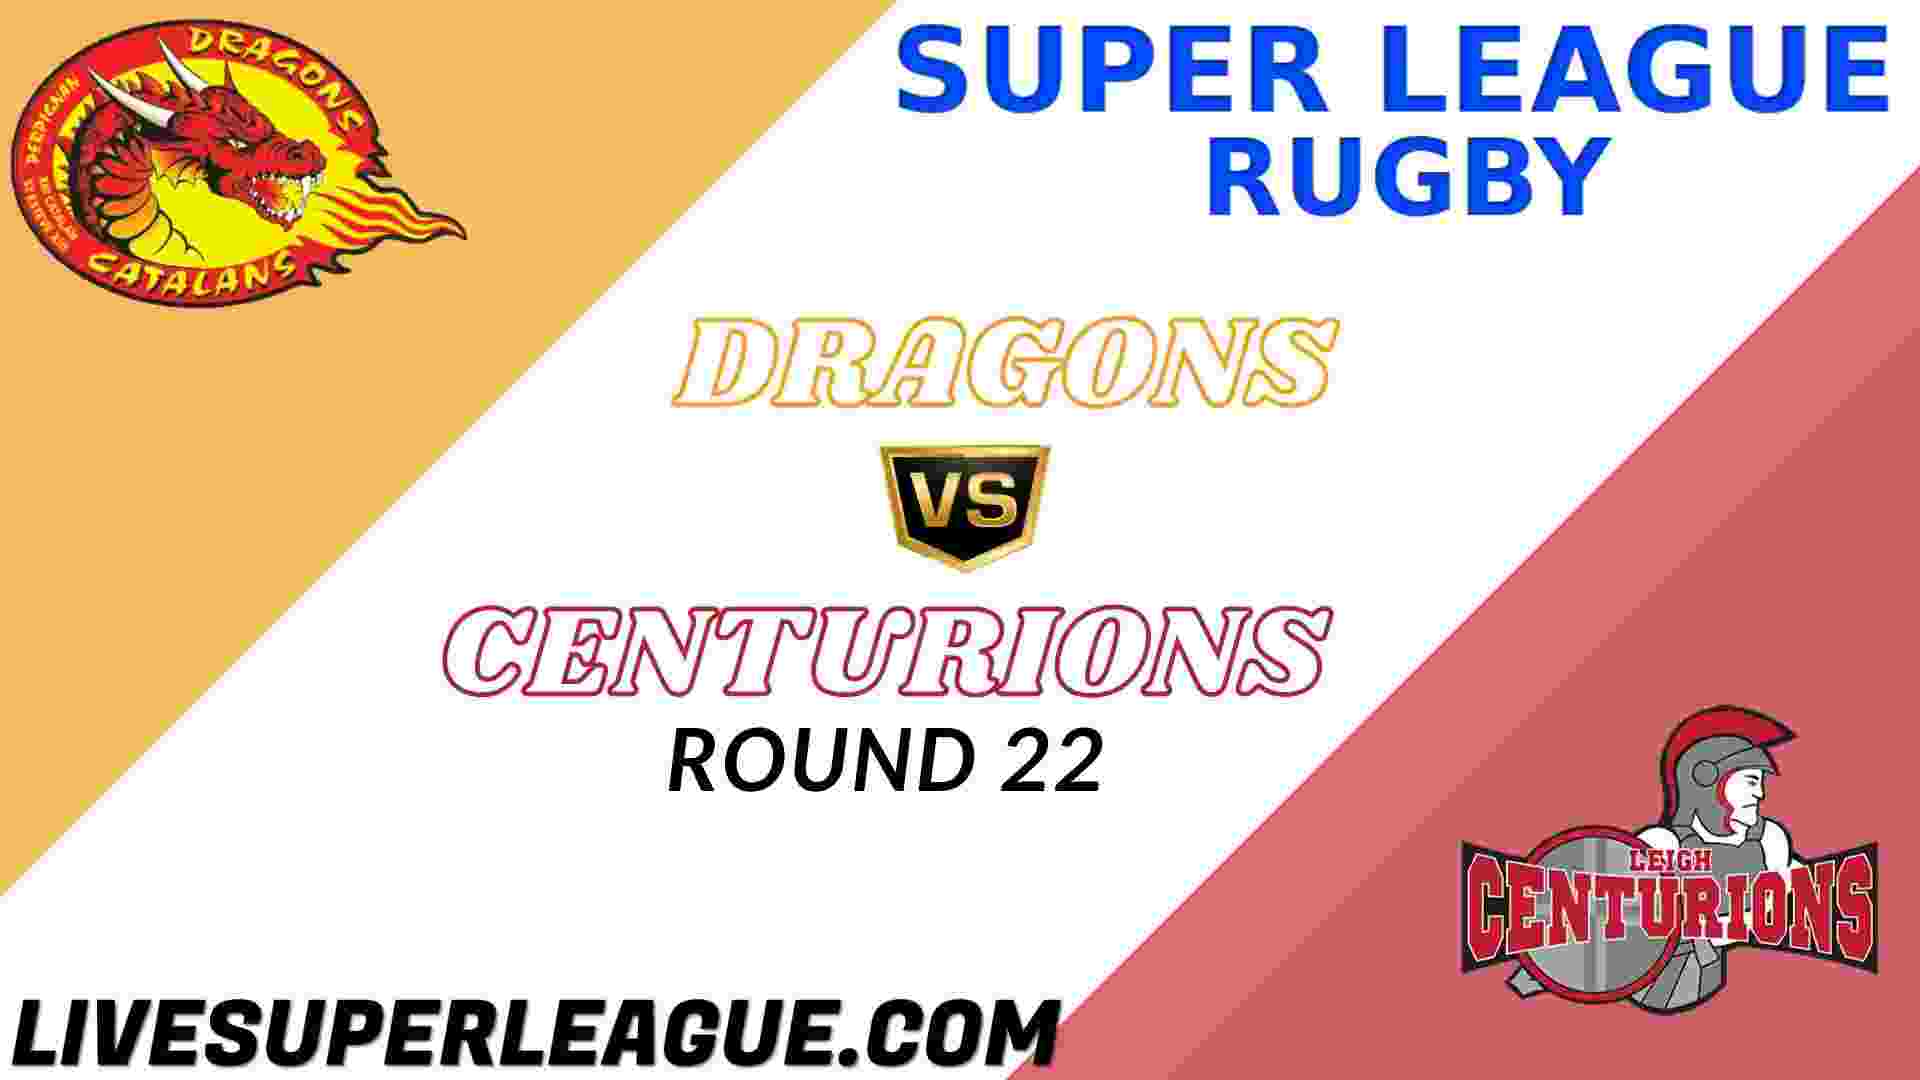 live-leigh-centurions-vs-catalans-dragons-coverage